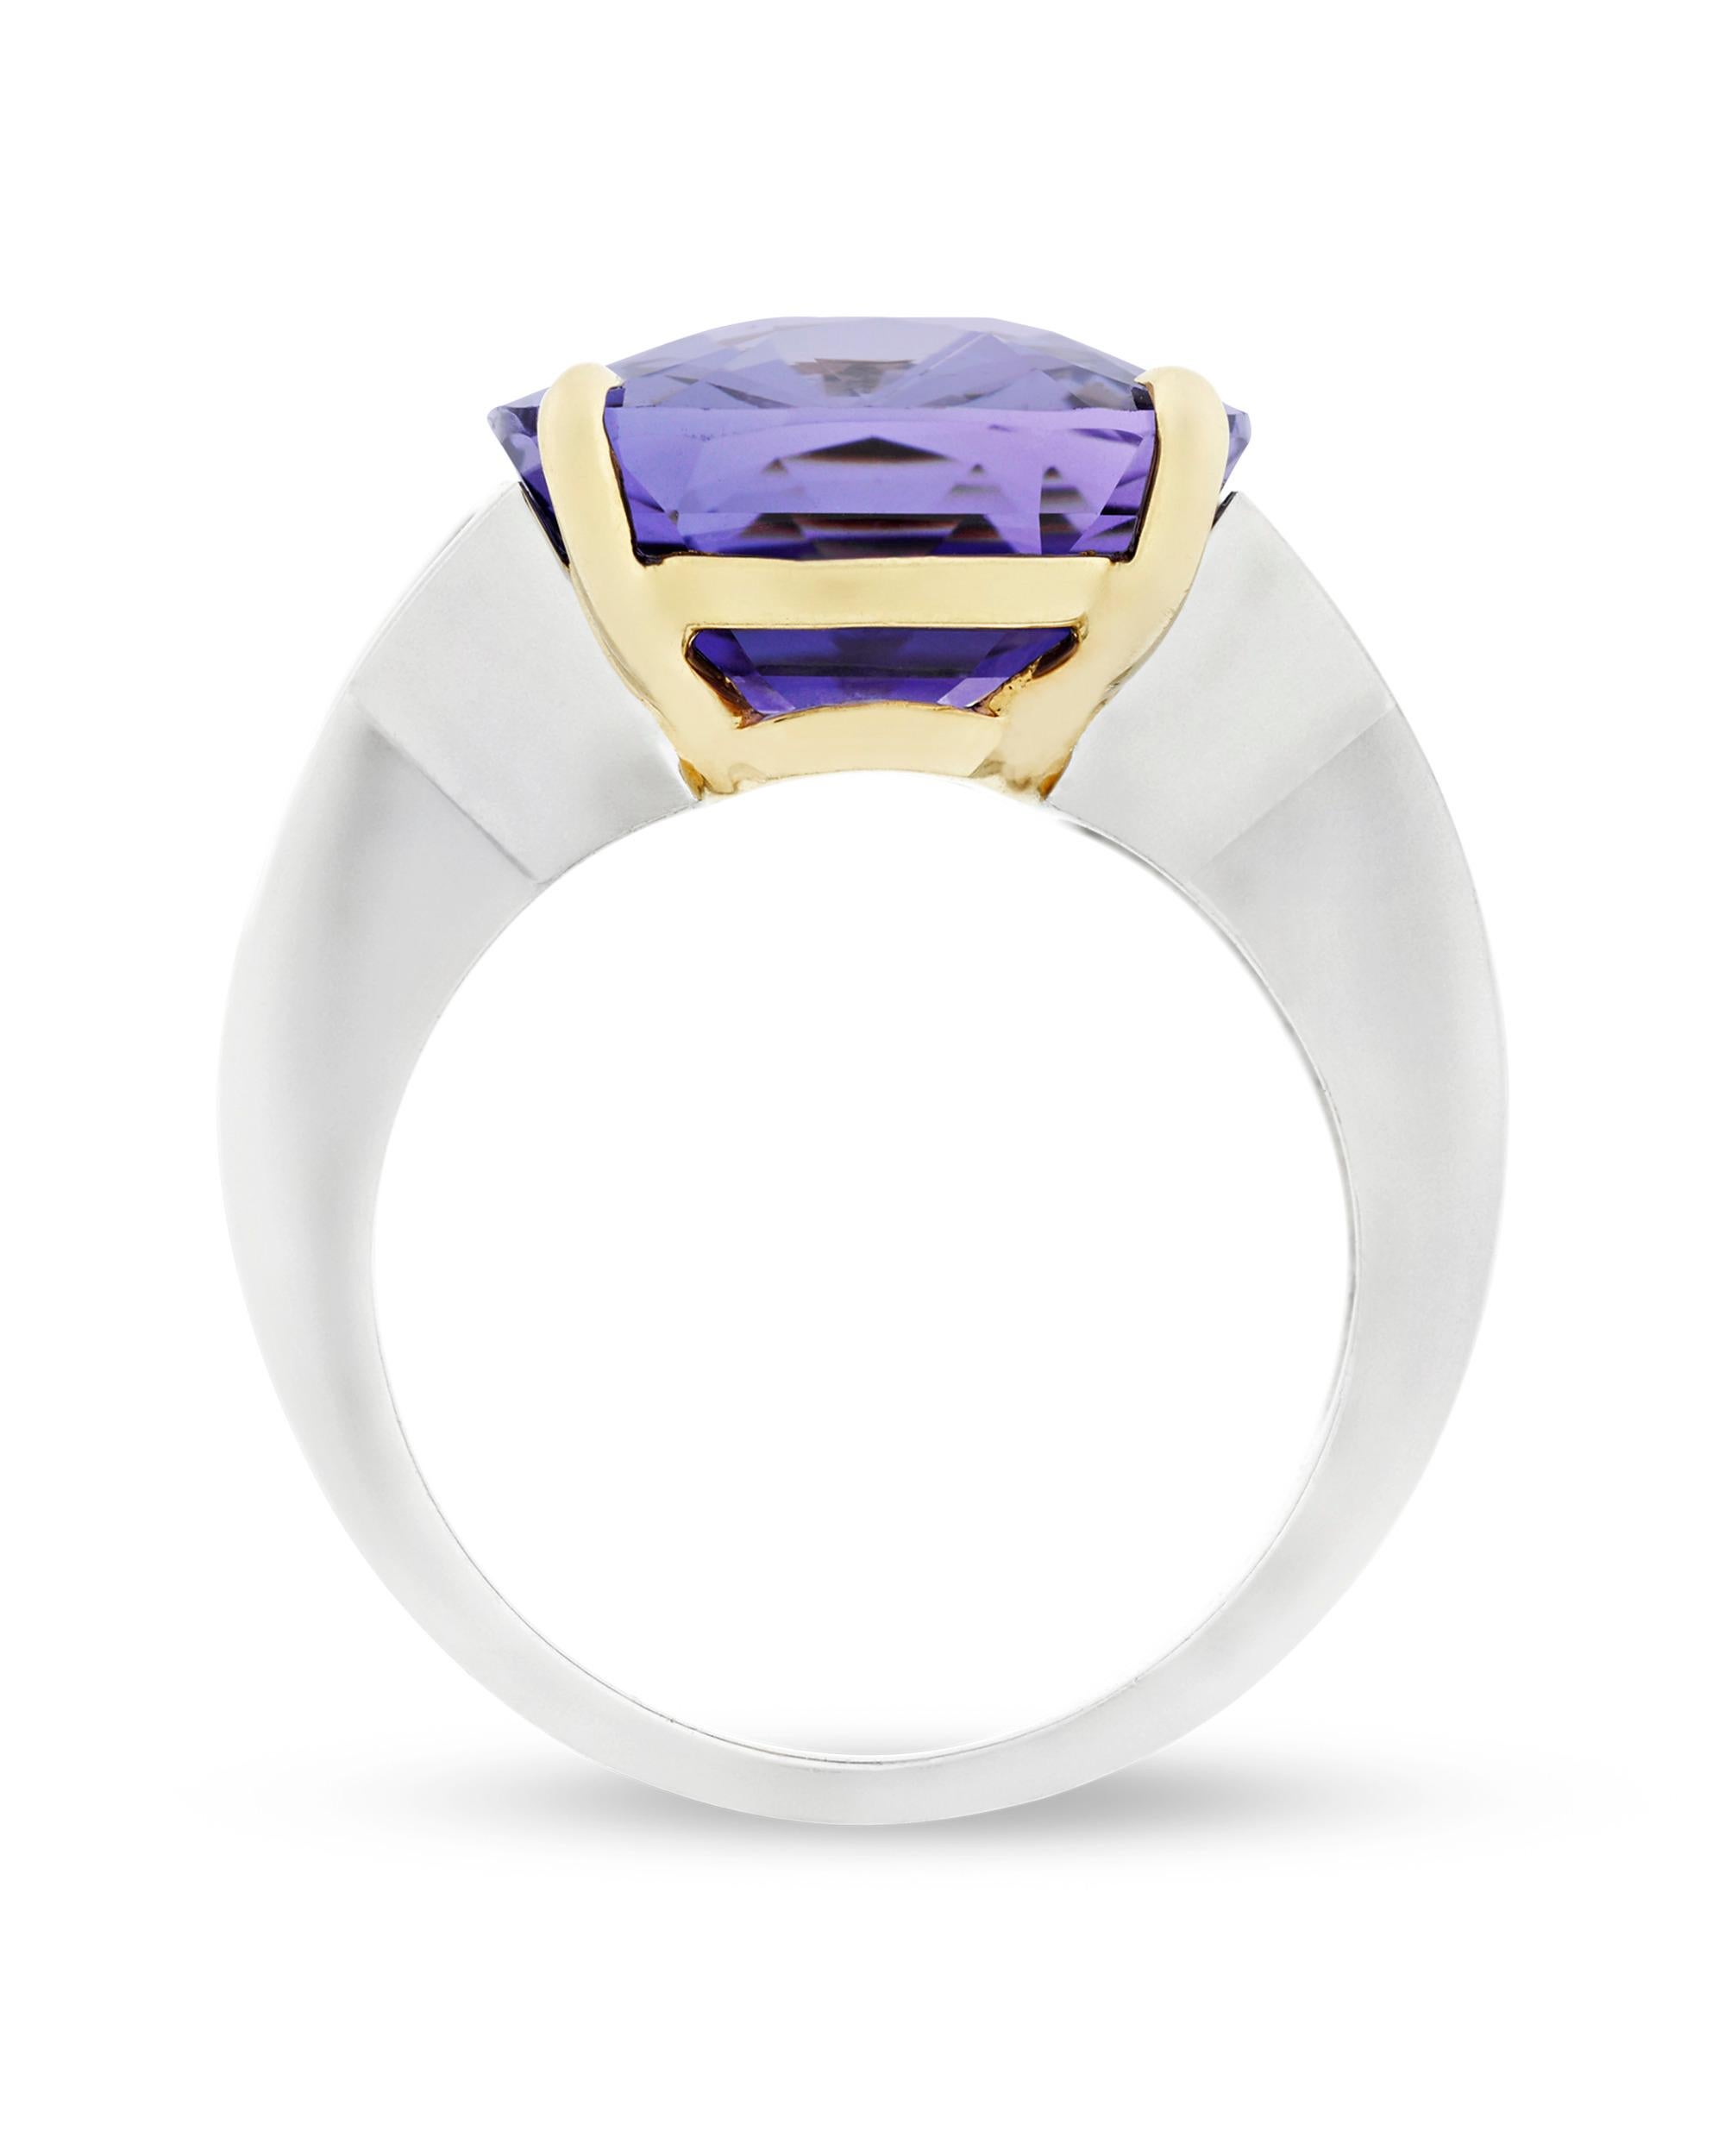 A brilliant 13.58-carat lavender sapphire radiates at the center of this classically stunning ring. The step-cut gem is set in a sophisticated platinum and 18k yellow gold setting between glistening diamonds totaling 1.40 carats. Both dramatic and